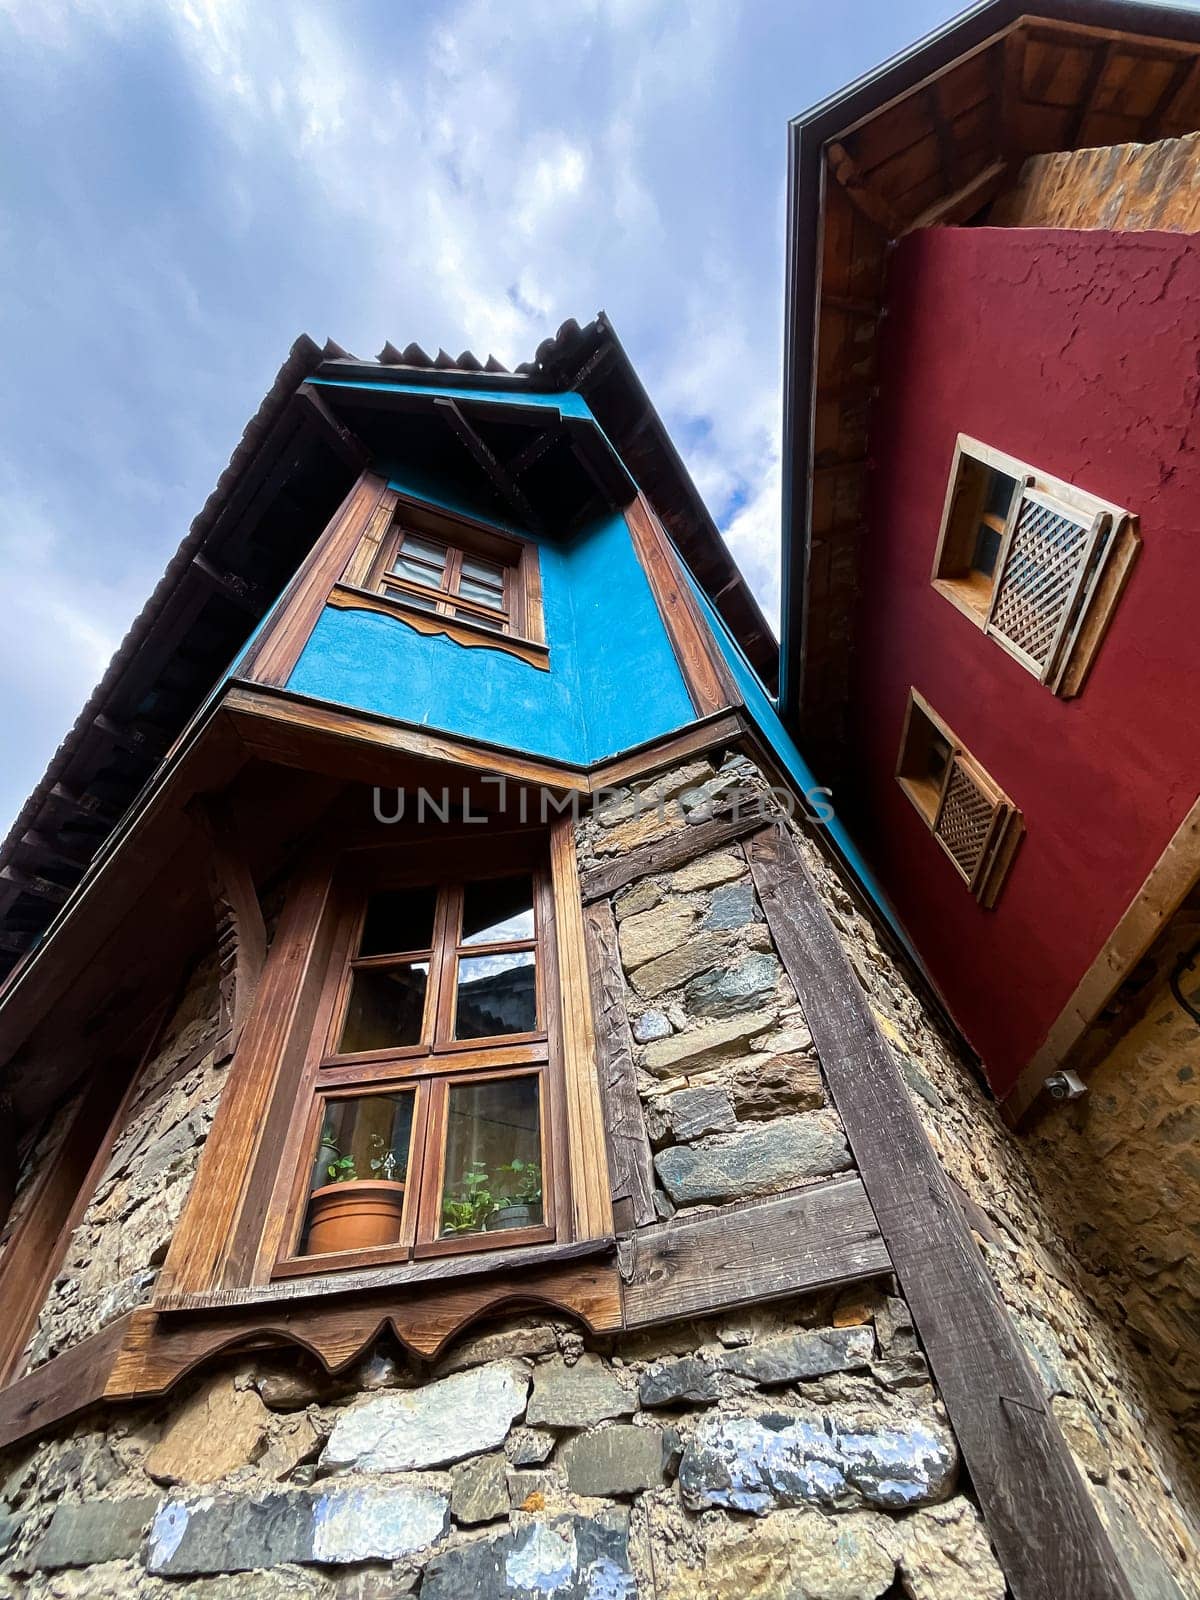 Traditional Ottoman house in blue and red. Old by Lunnica